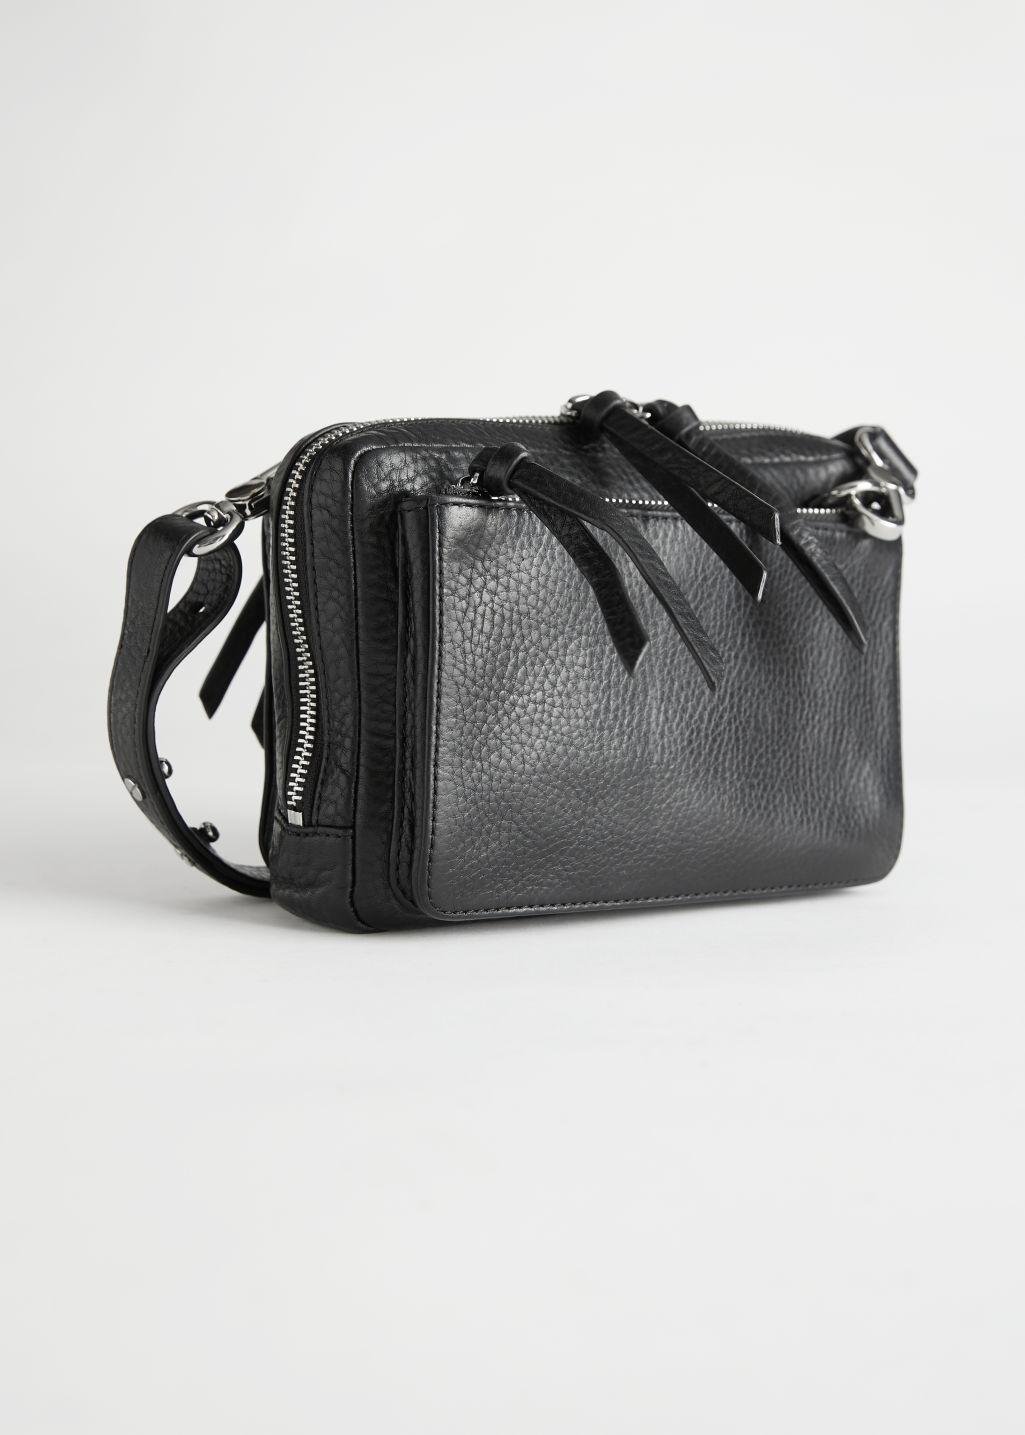 & Other Stories Grained Leather Crossbody Bag in Black | Lyst